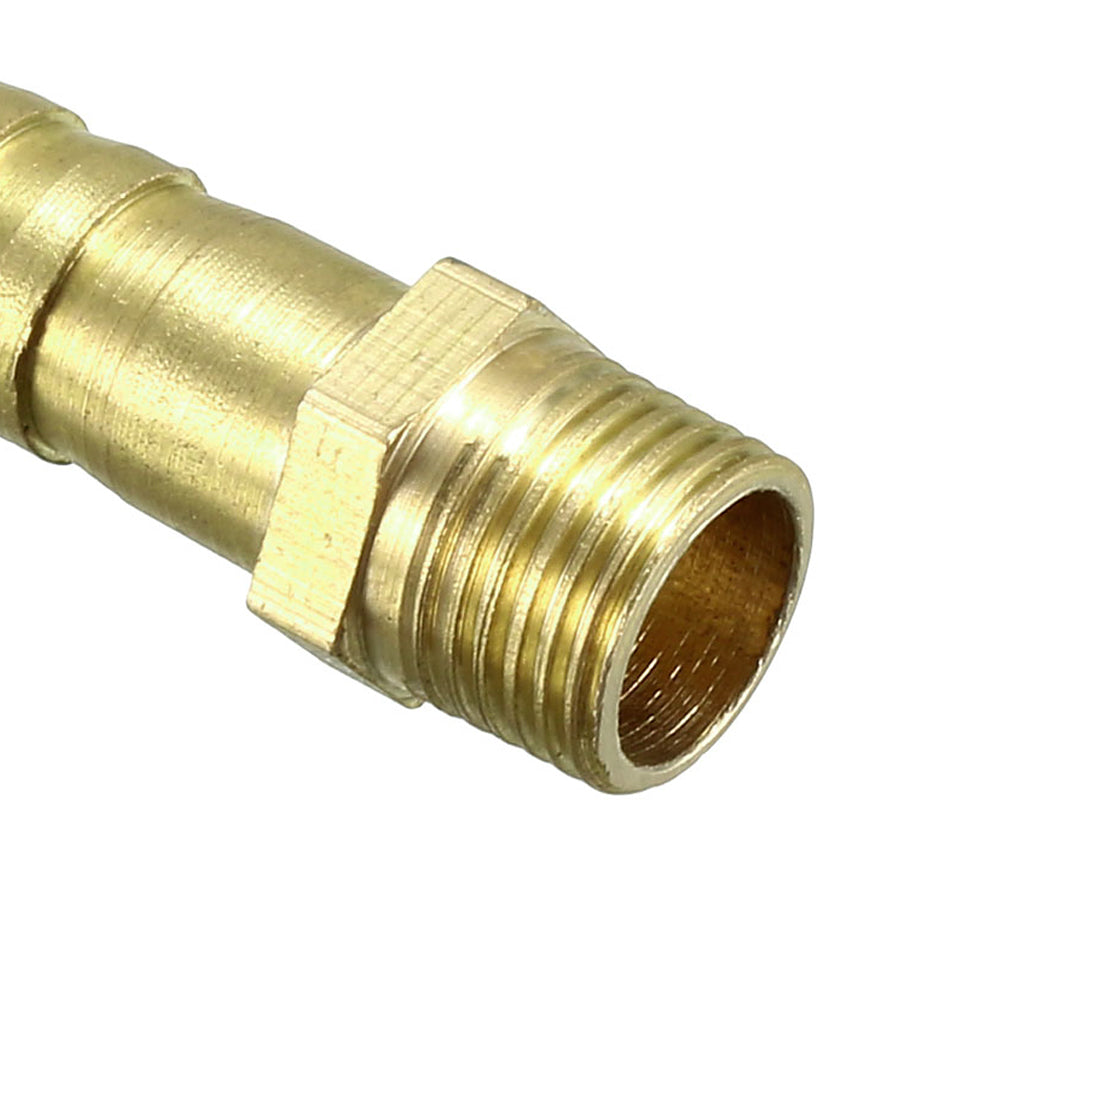 uxcell Uxcell Brass Barb Hose Fitting Connector Adapter 8mm Barbed x 1/8 PT Male Pipe 5pcs